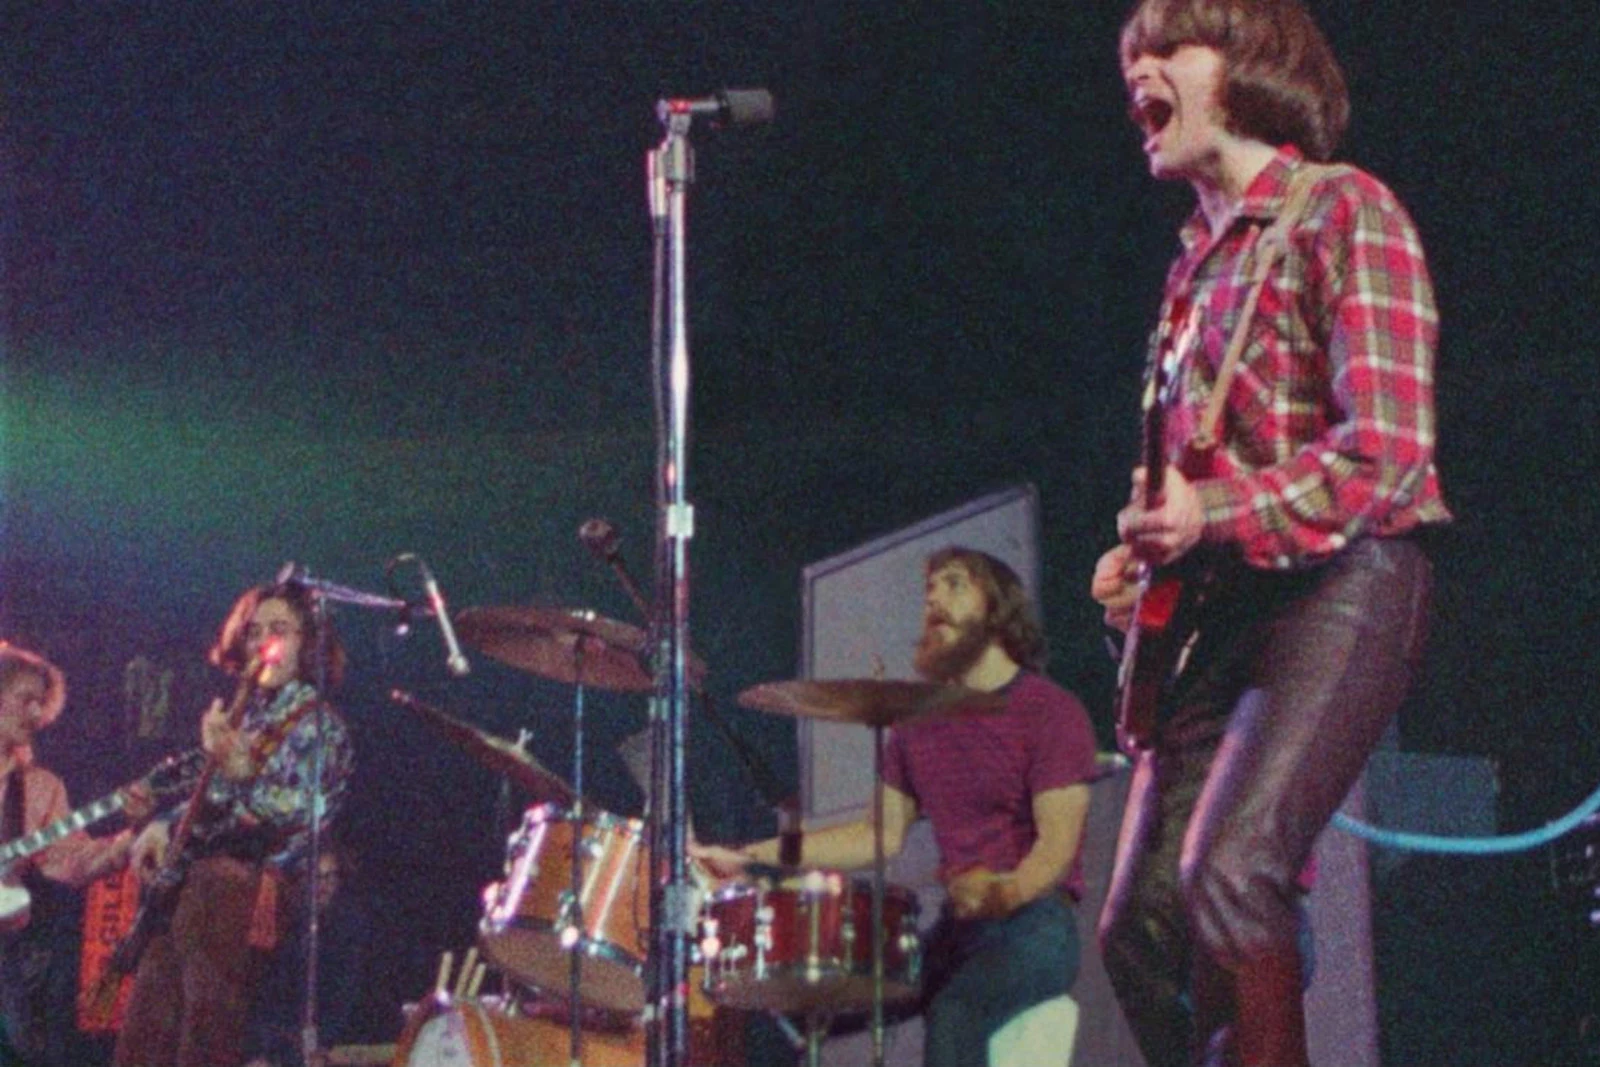 Creedence Clearwater Revival Live Album and Film Set for Release